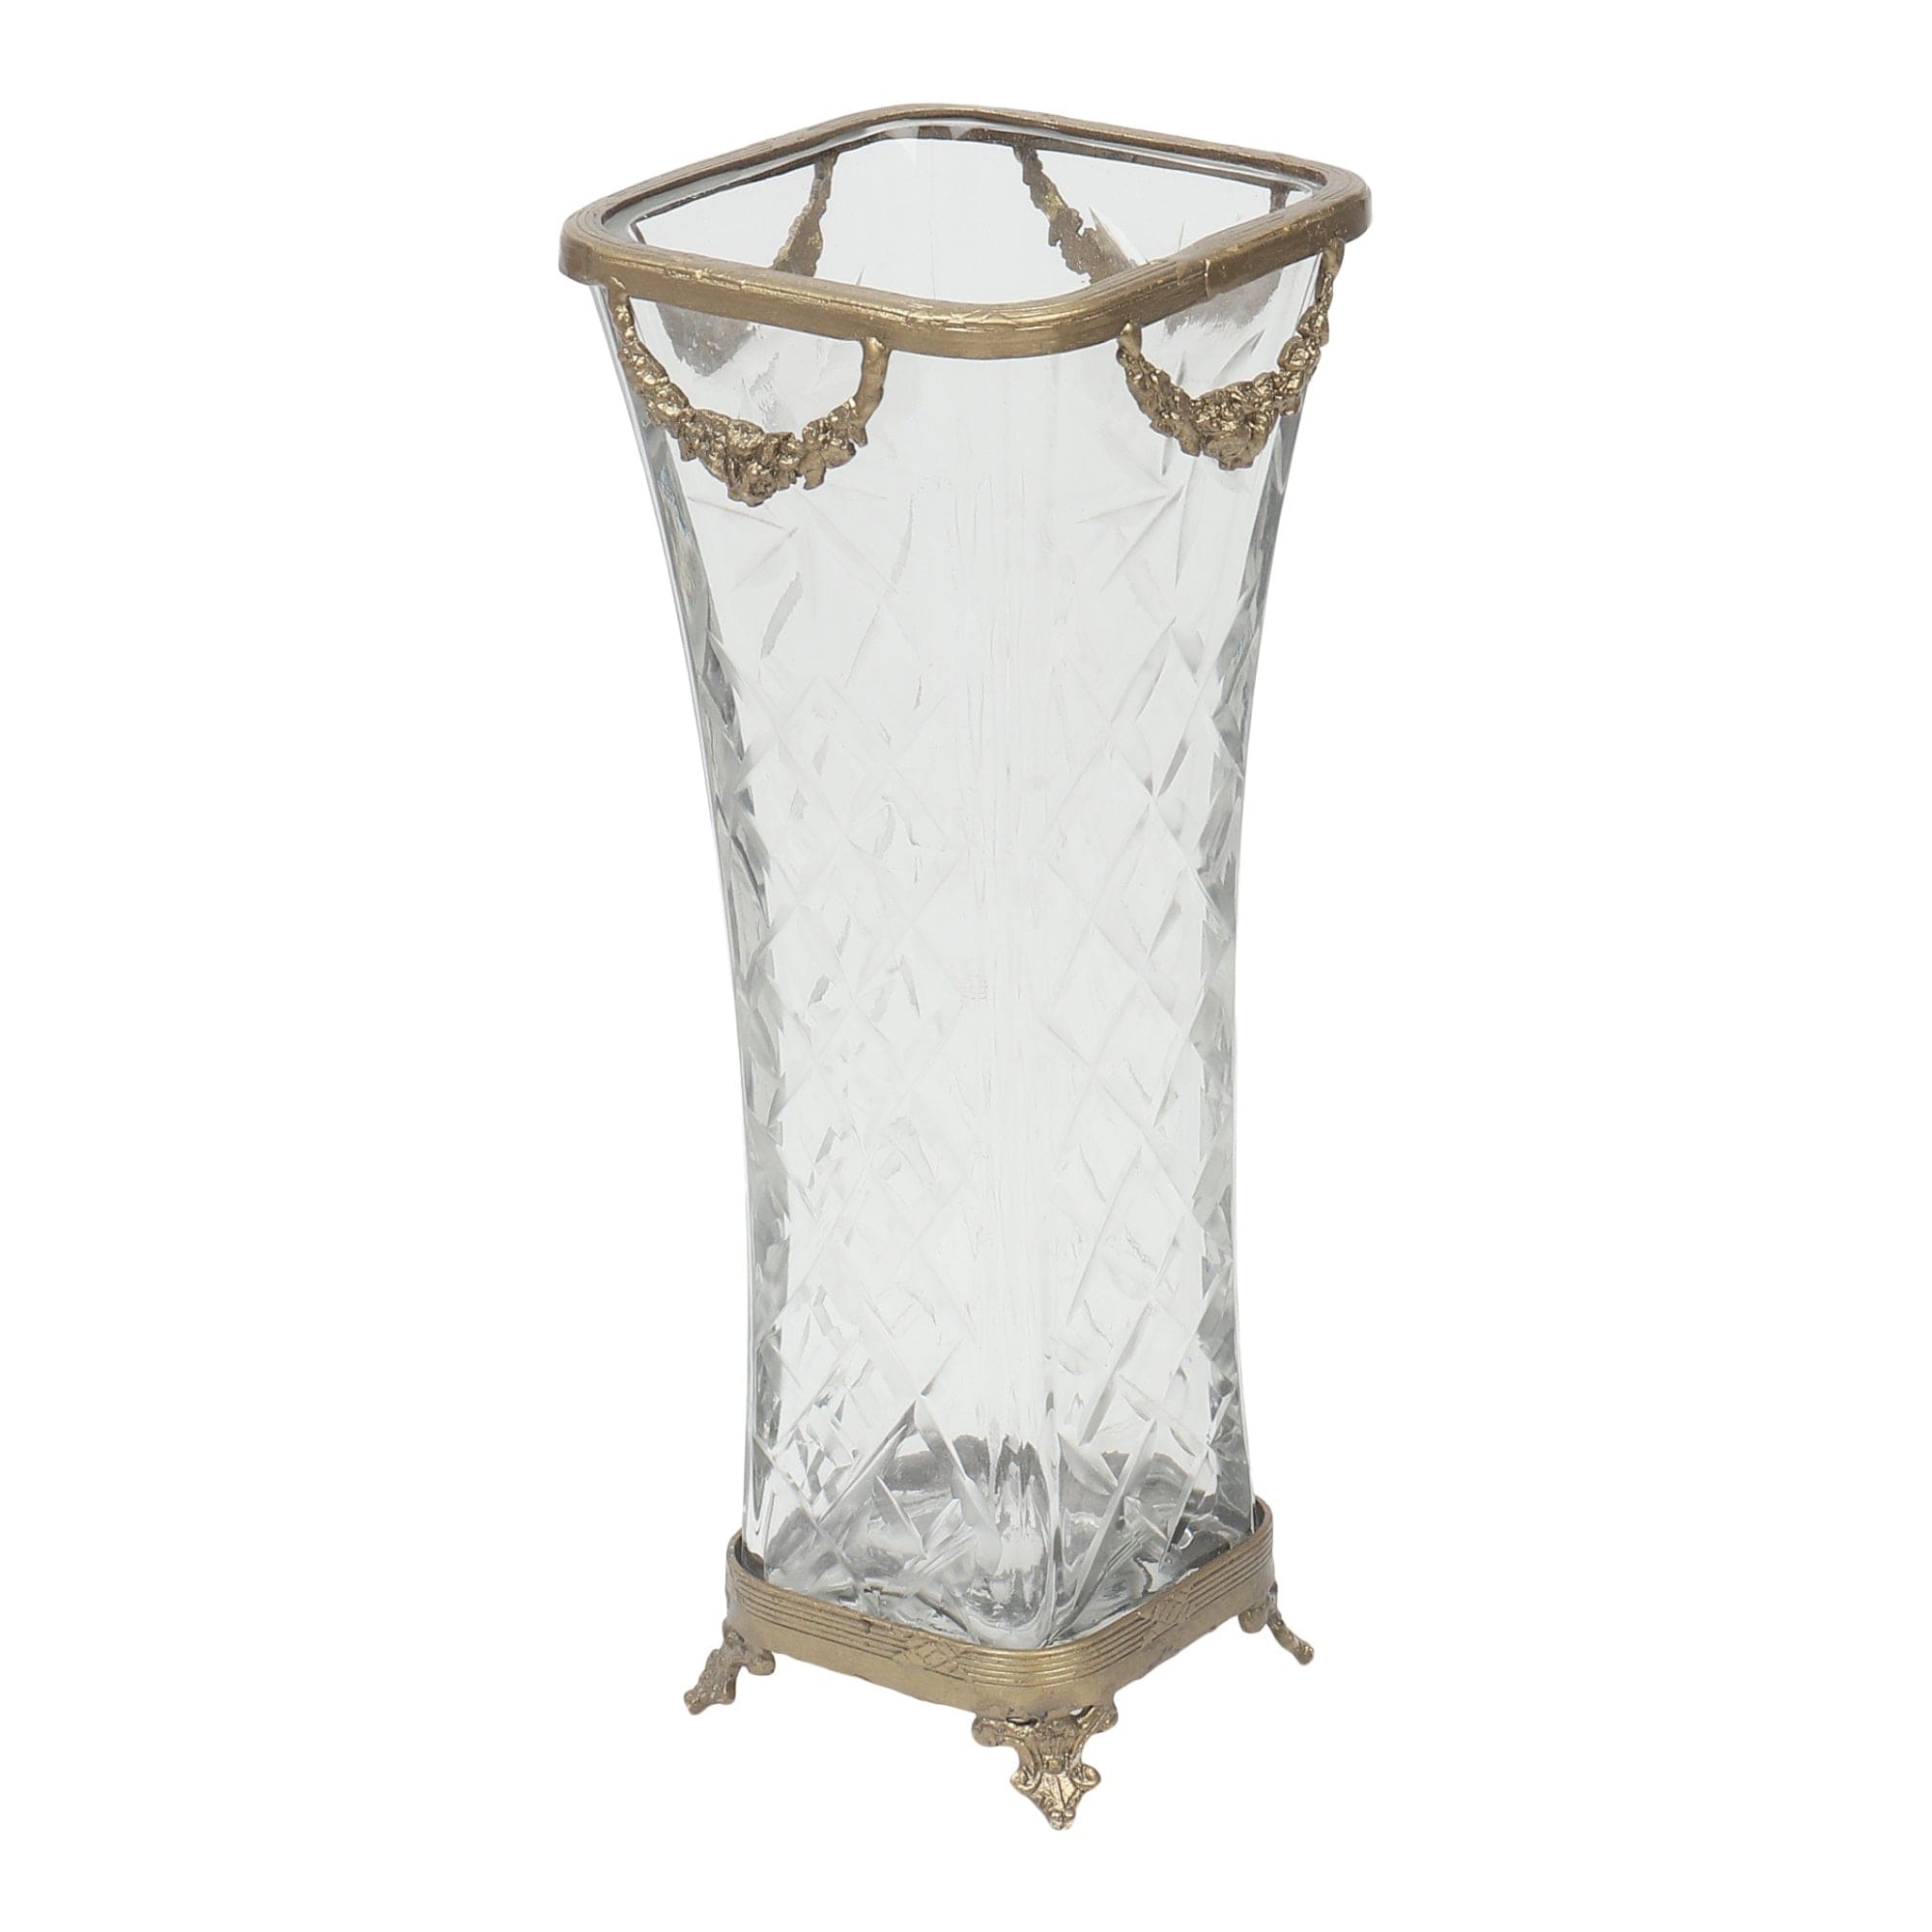 Diamond Blossom Glass Vase with antique brass rings